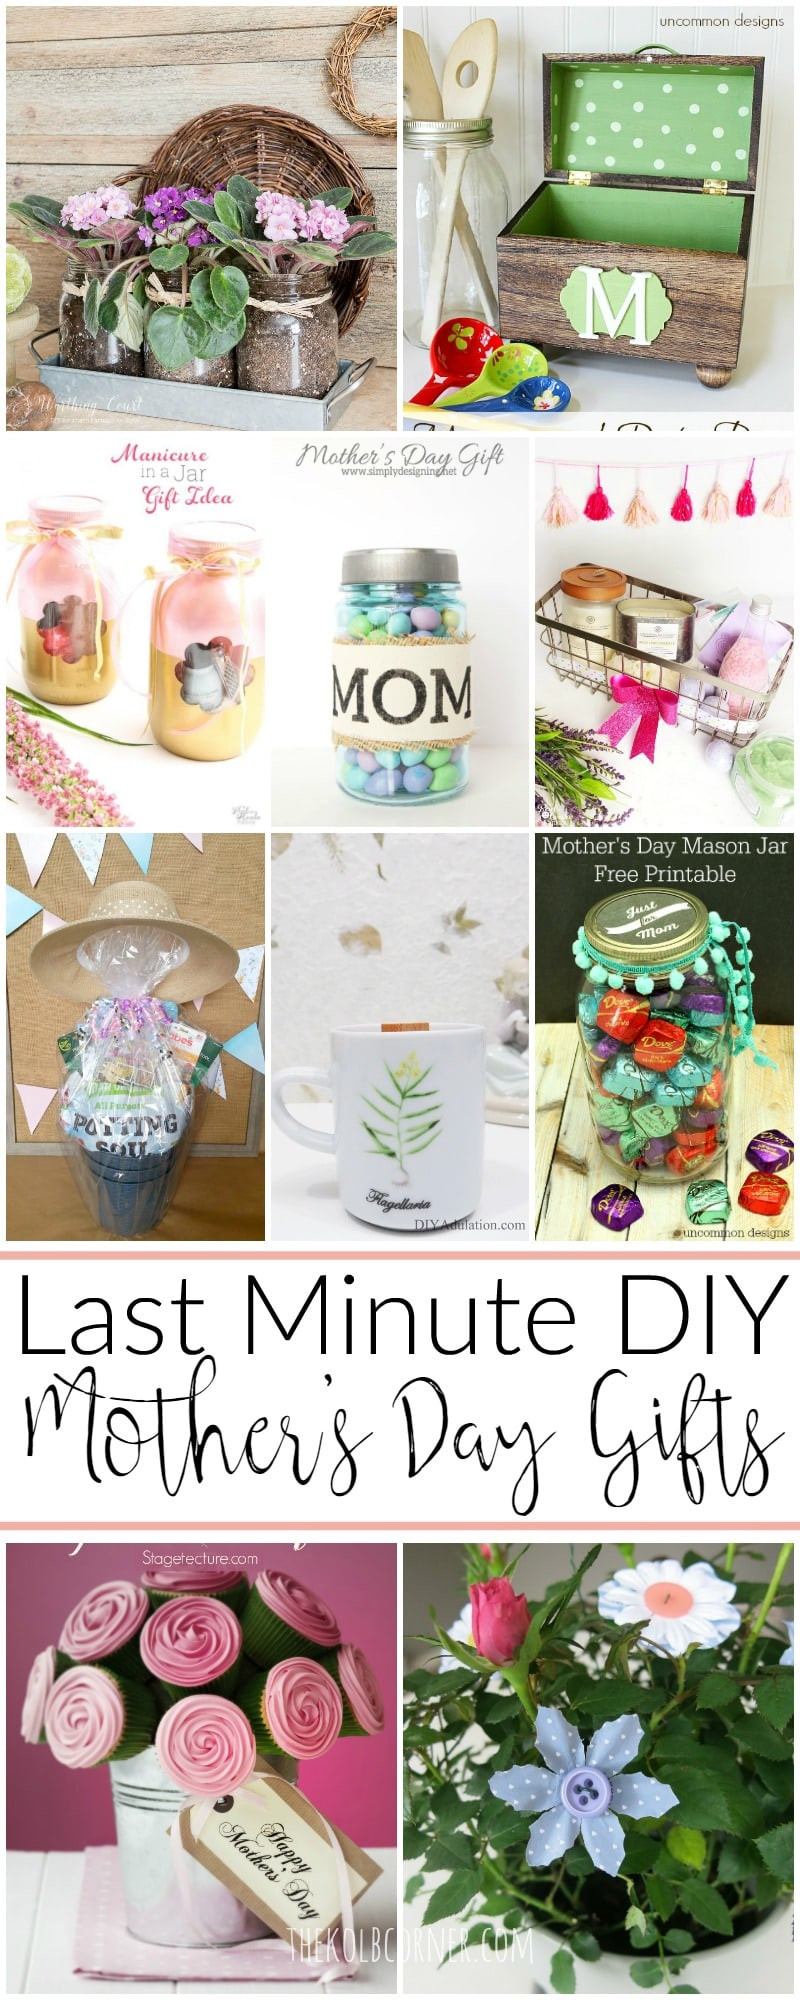 Last Minute Mother's Day Delivery Gifts
 Last Minute DIY Mother s Day Gift Ideas